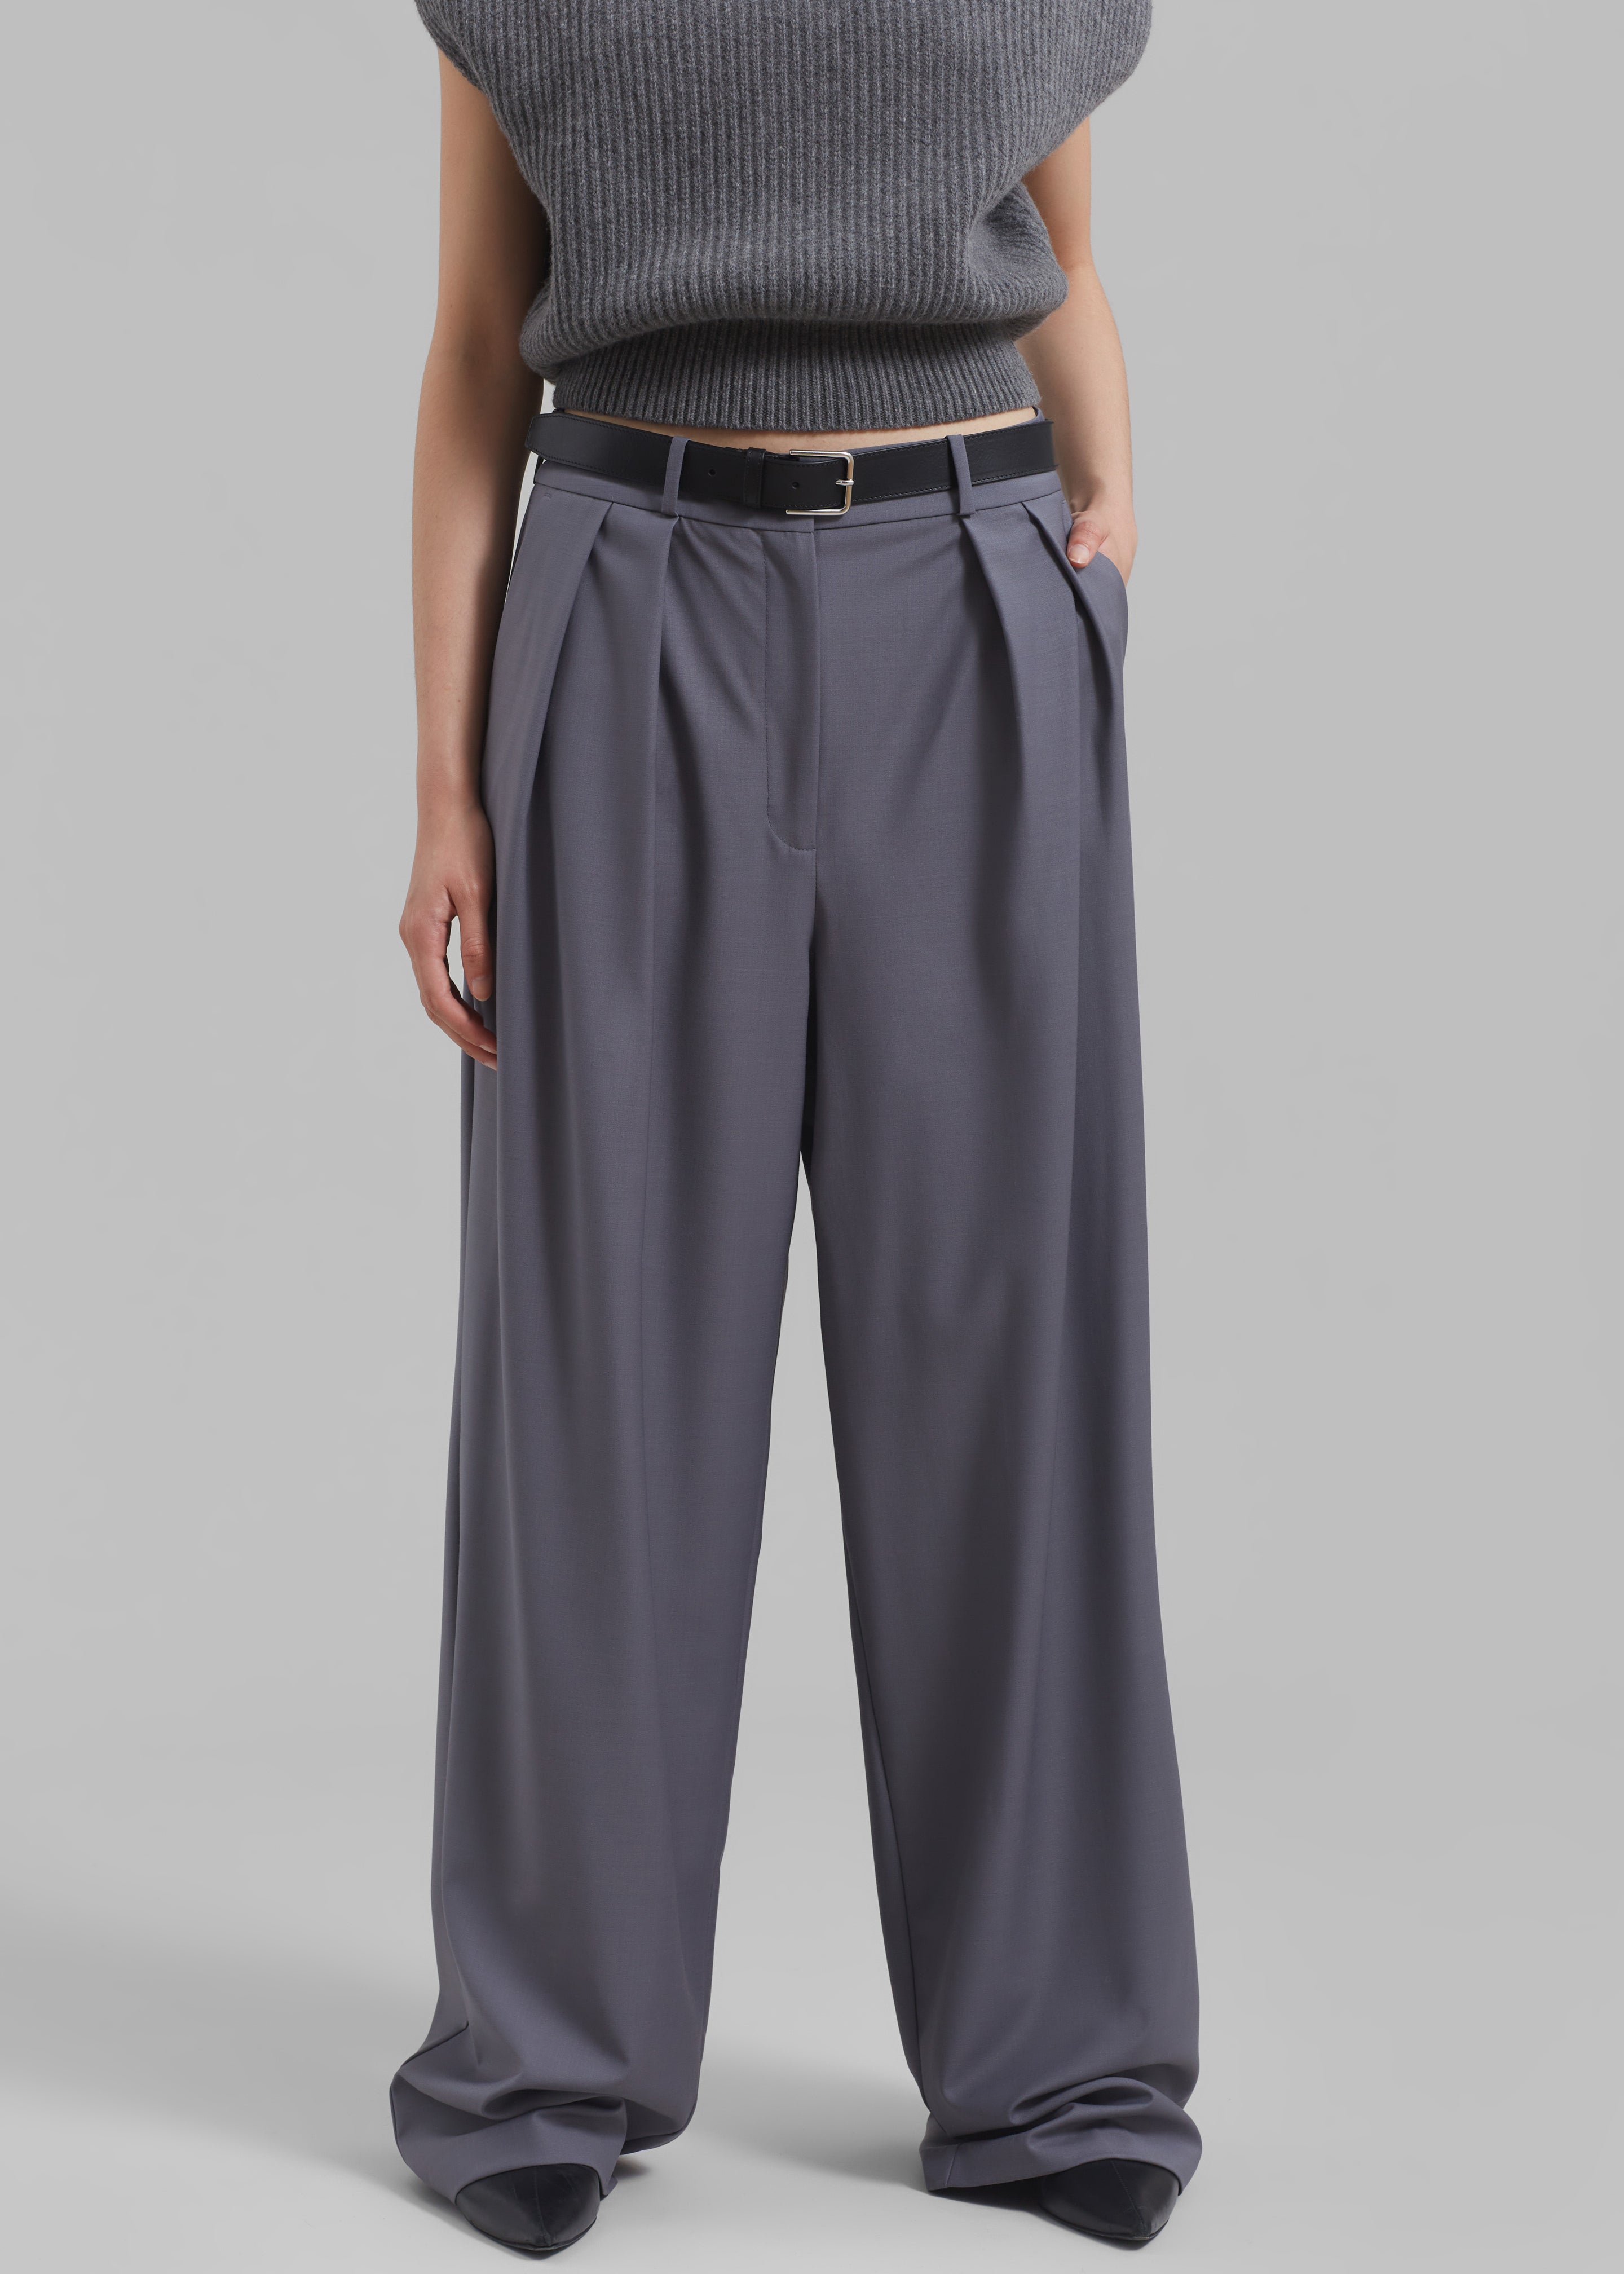 Ripley Pleated Trousers - Grey - 11